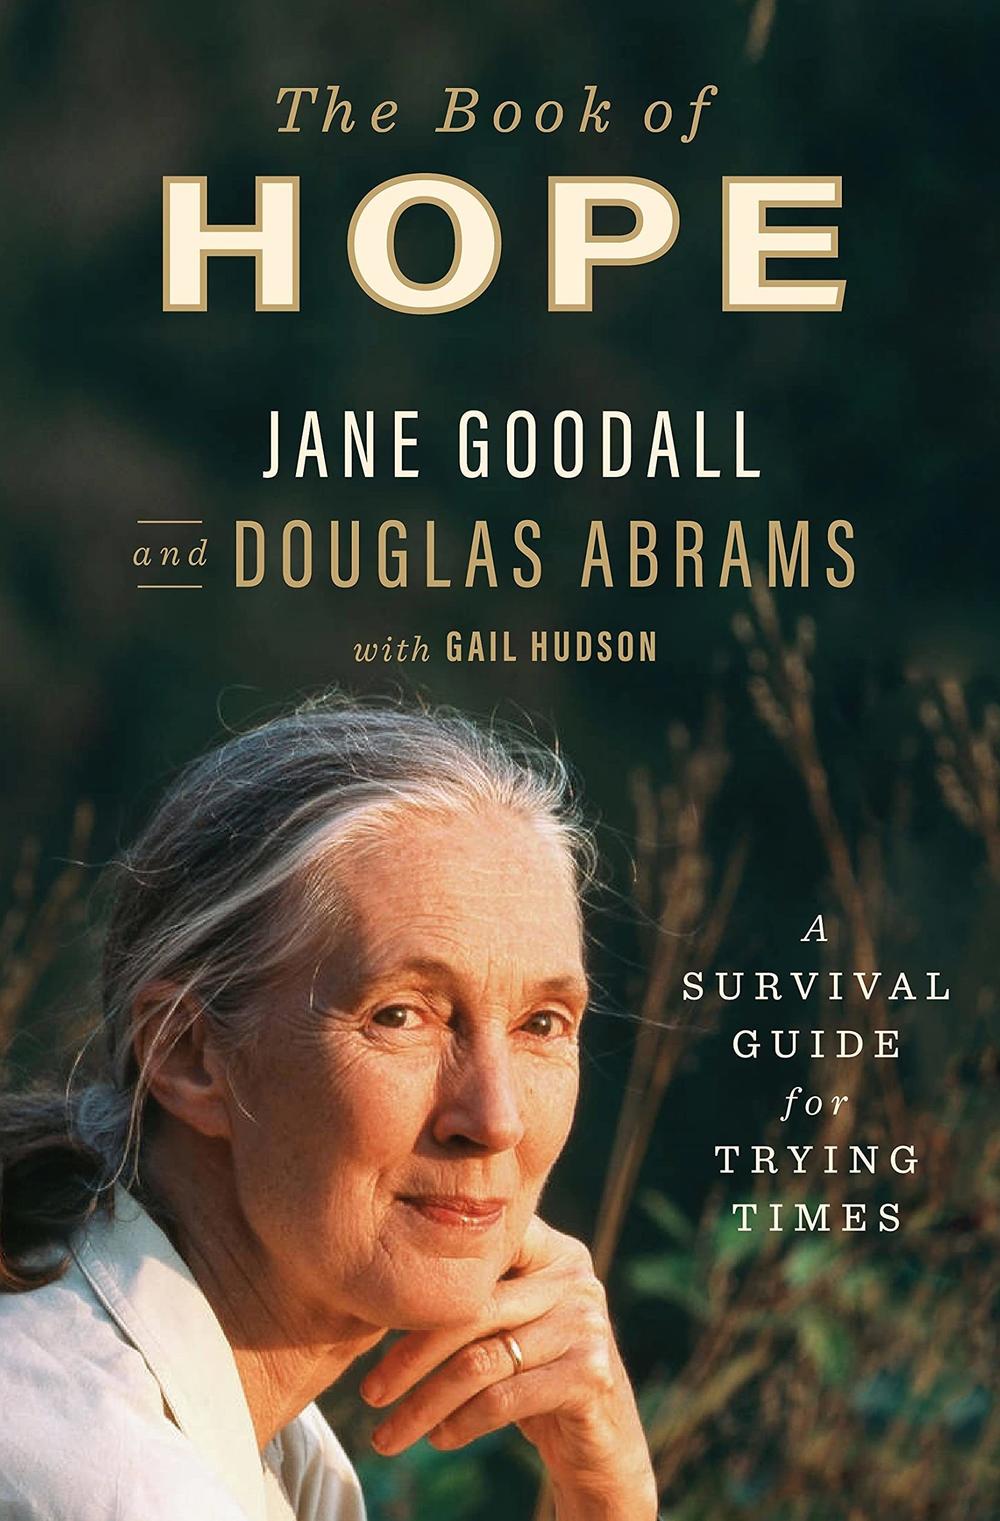 <em>The Book of Hope: A Survival Guide for Trying Times,</em> by Jane Goodall and Douglas Abrams, with Gail Hudson